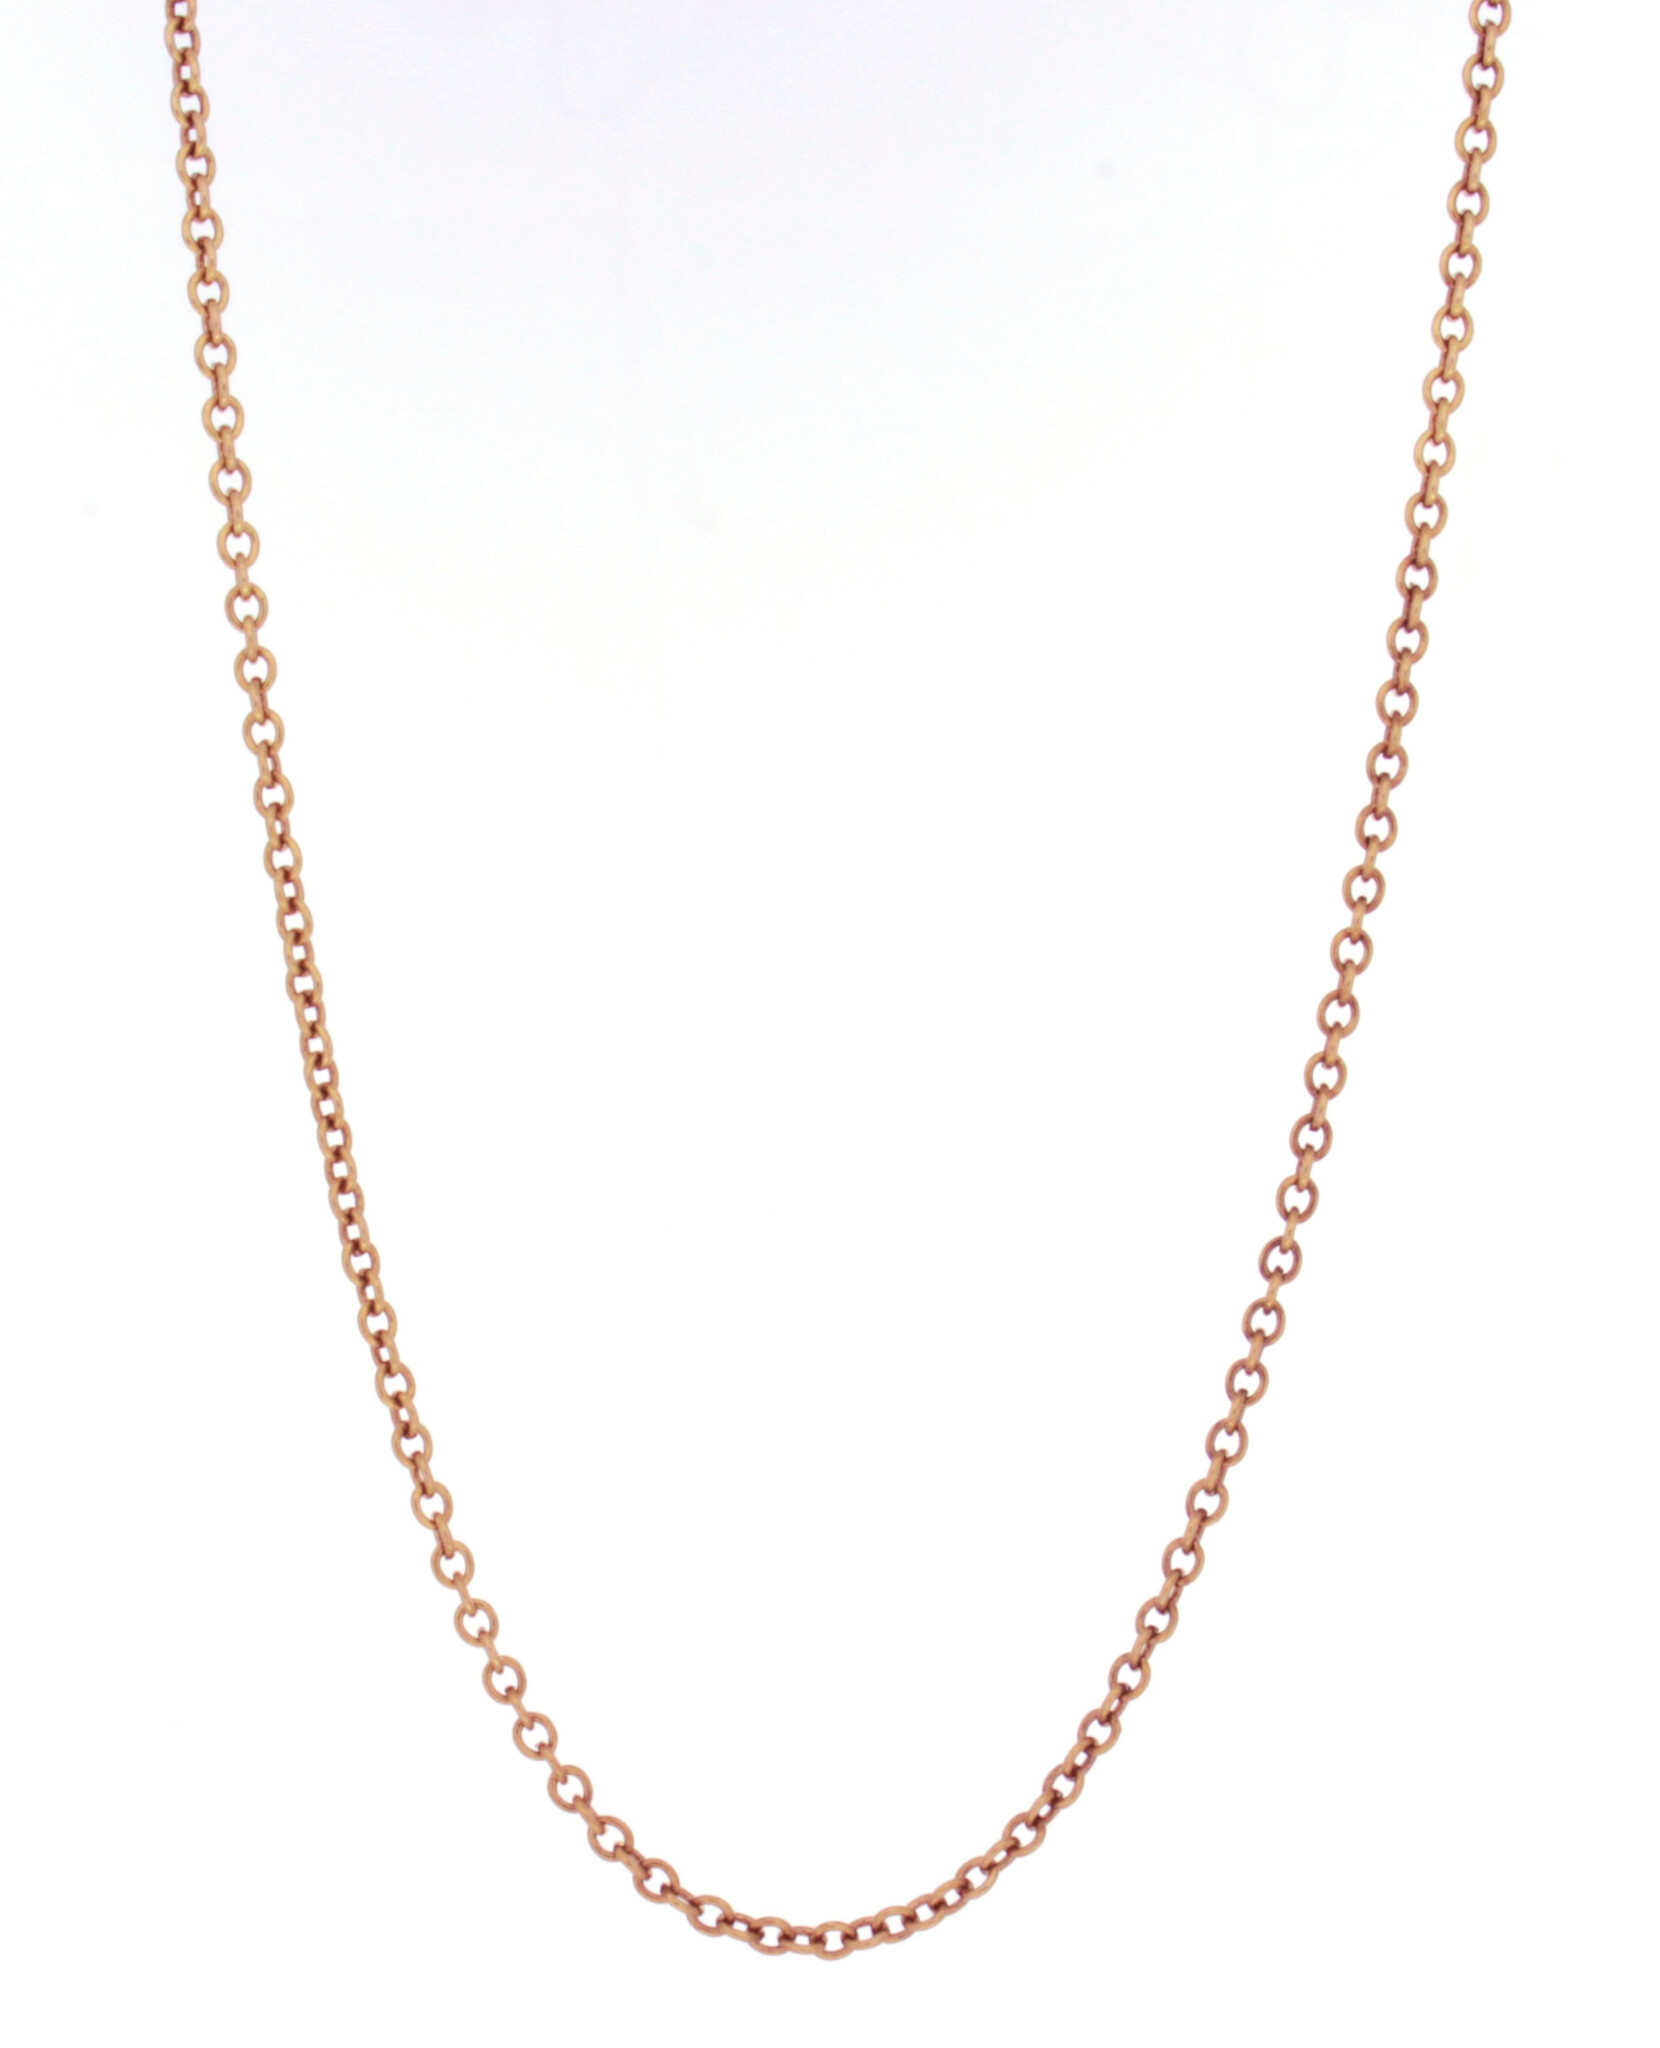 10K Rose Gold Link Chain Necklace (18")-2